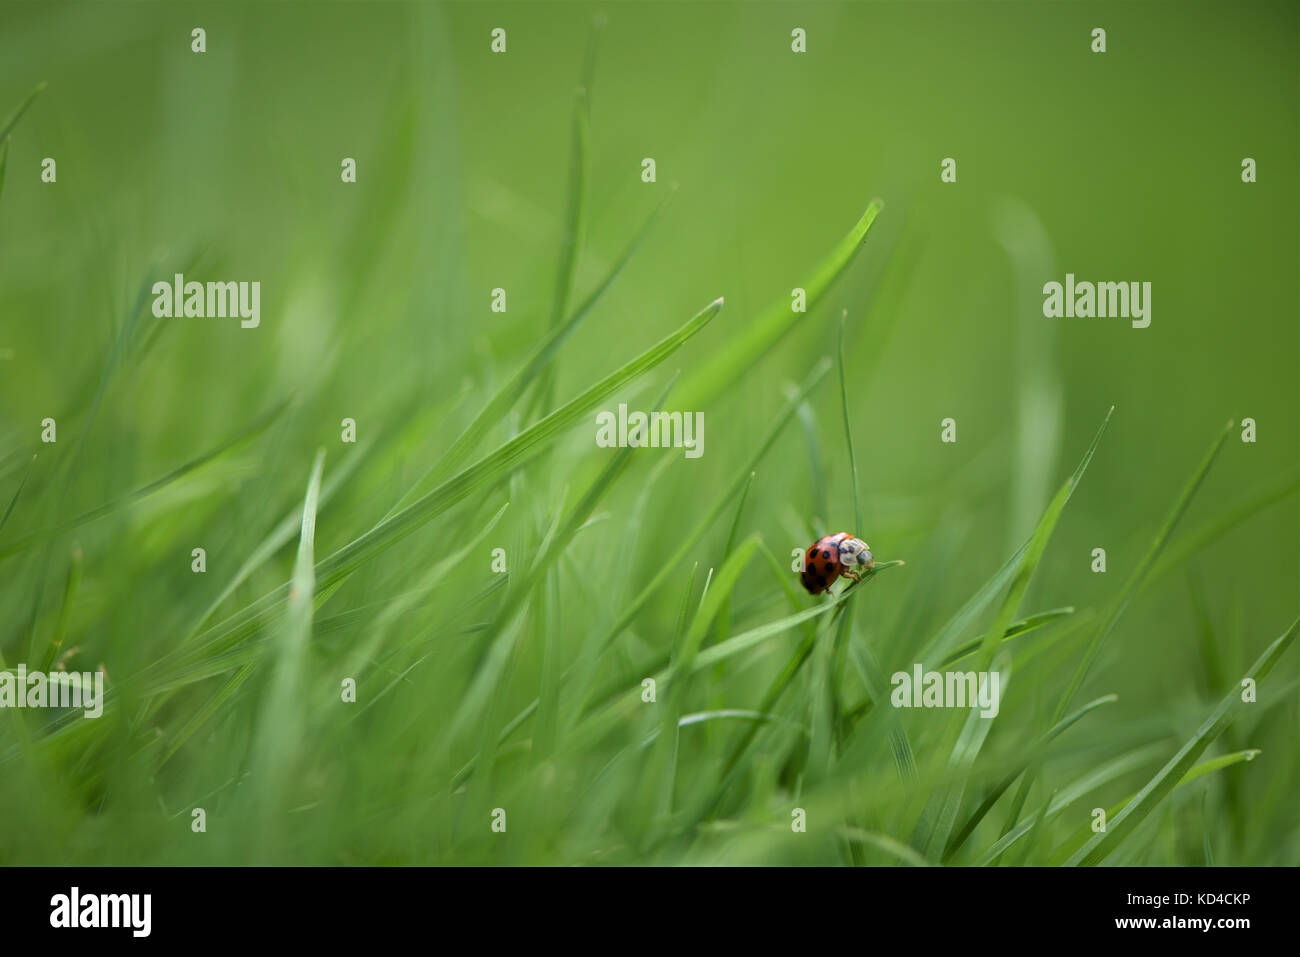 close up colorful photography image of small red ladybird insect on bright green grass with contrasting blur background and space Stock Photo